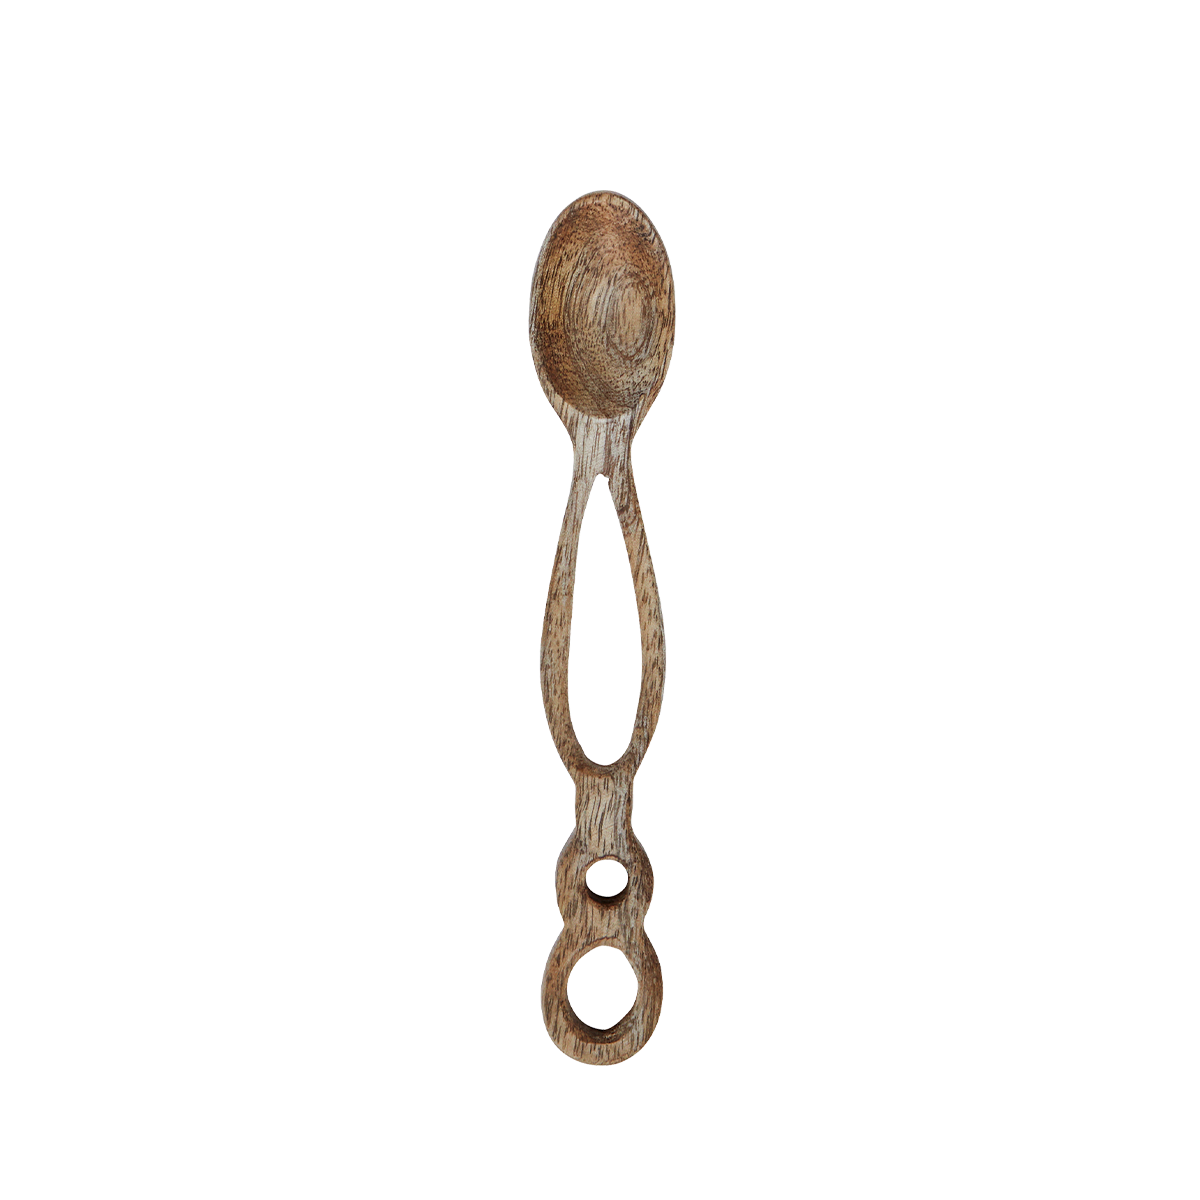 Hand carved wooden spoon